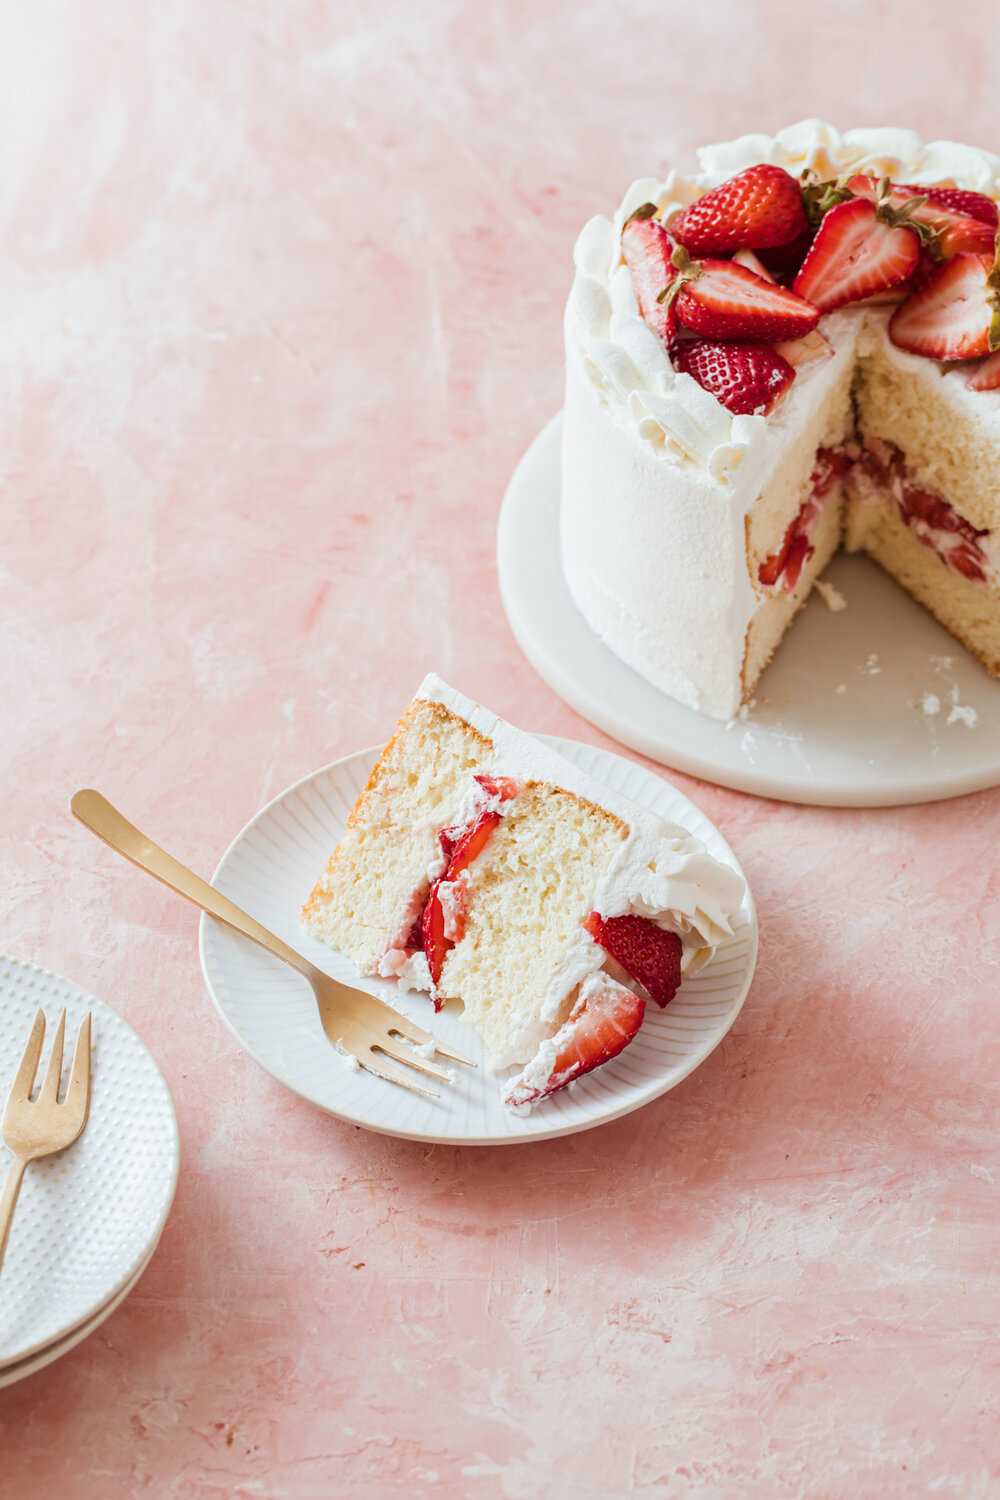 Small strawberry chiffon cake with whipped cream frosting